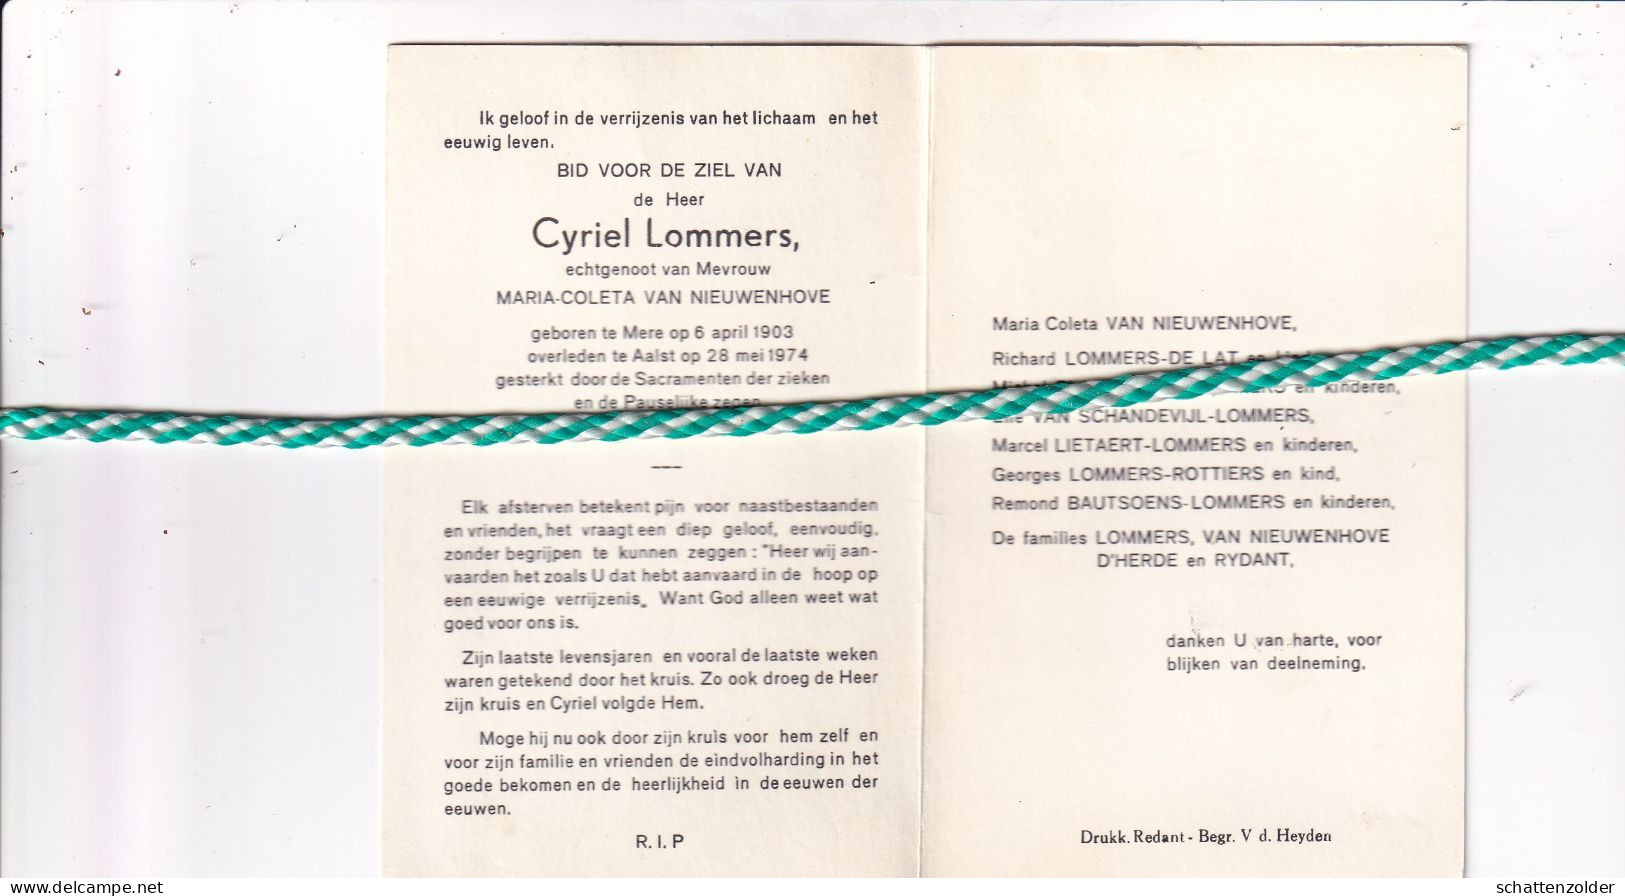 Cyriel Lommers-Van Nieuwenhove, Mere 1903, Aalst 1974 - Obituary Notices